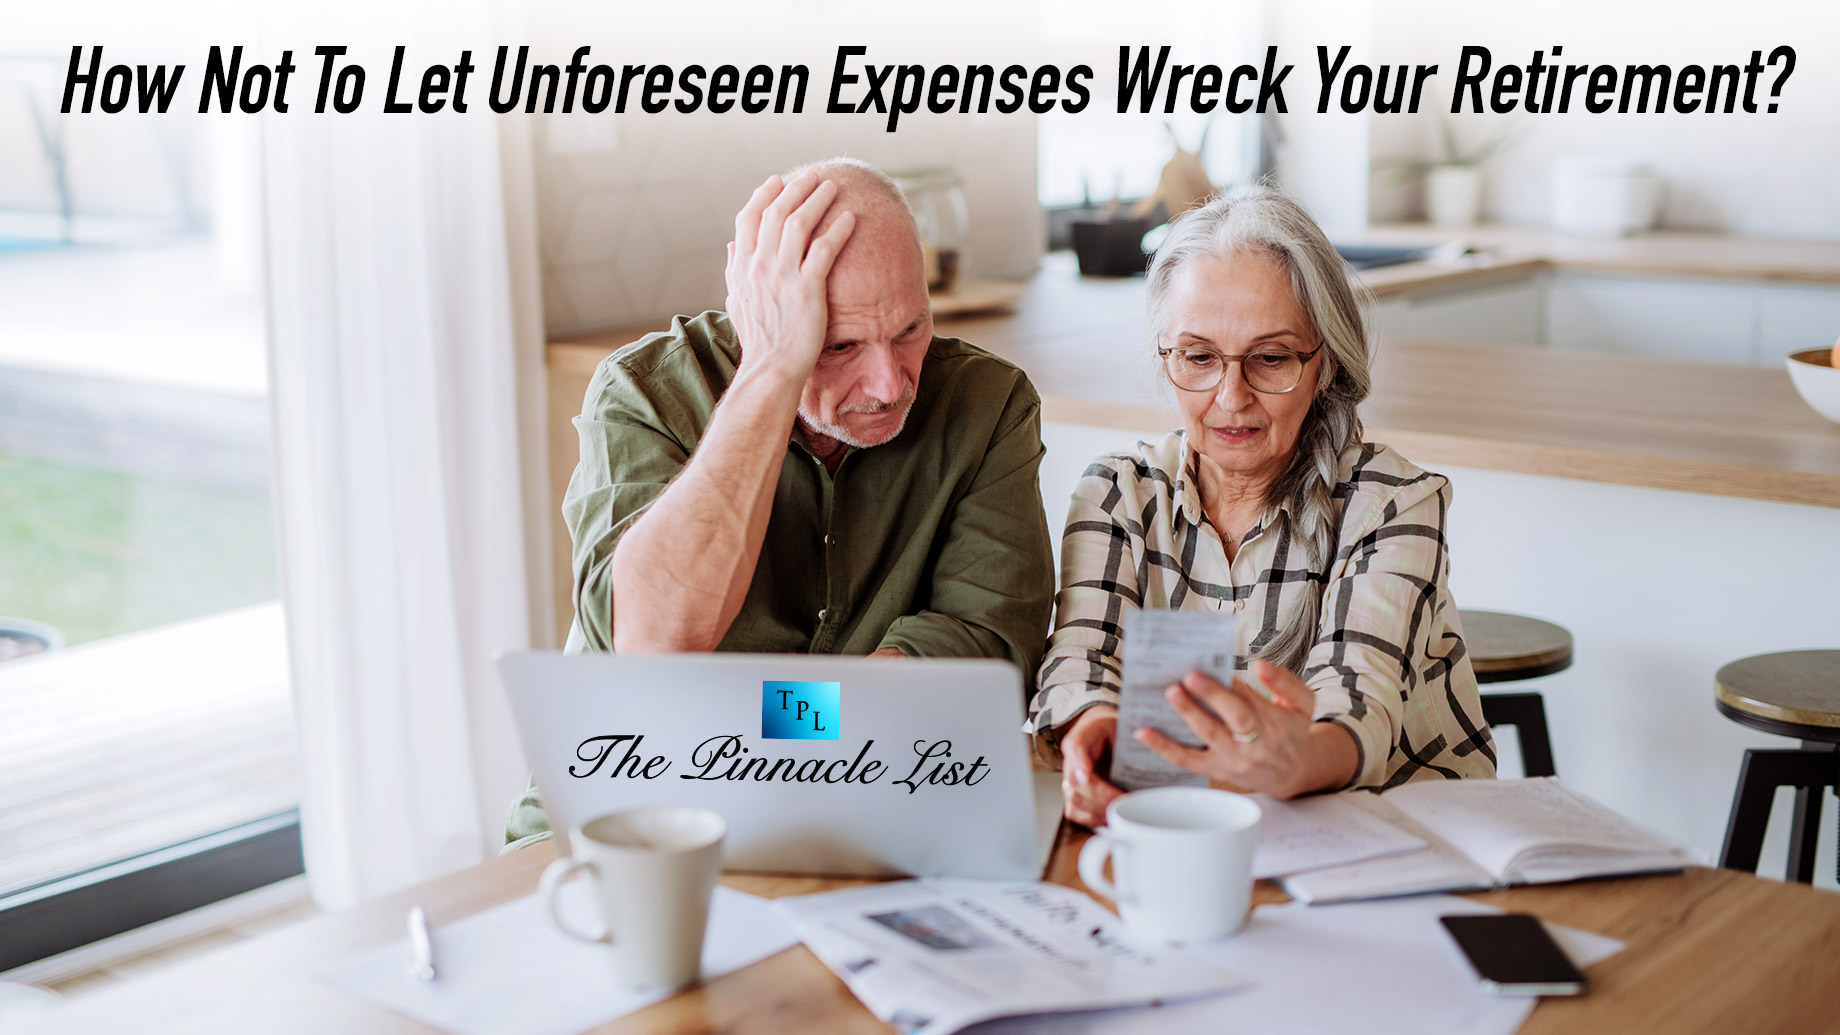 How Not To Let Unforeseen Expenses Wreck Your Retirement?